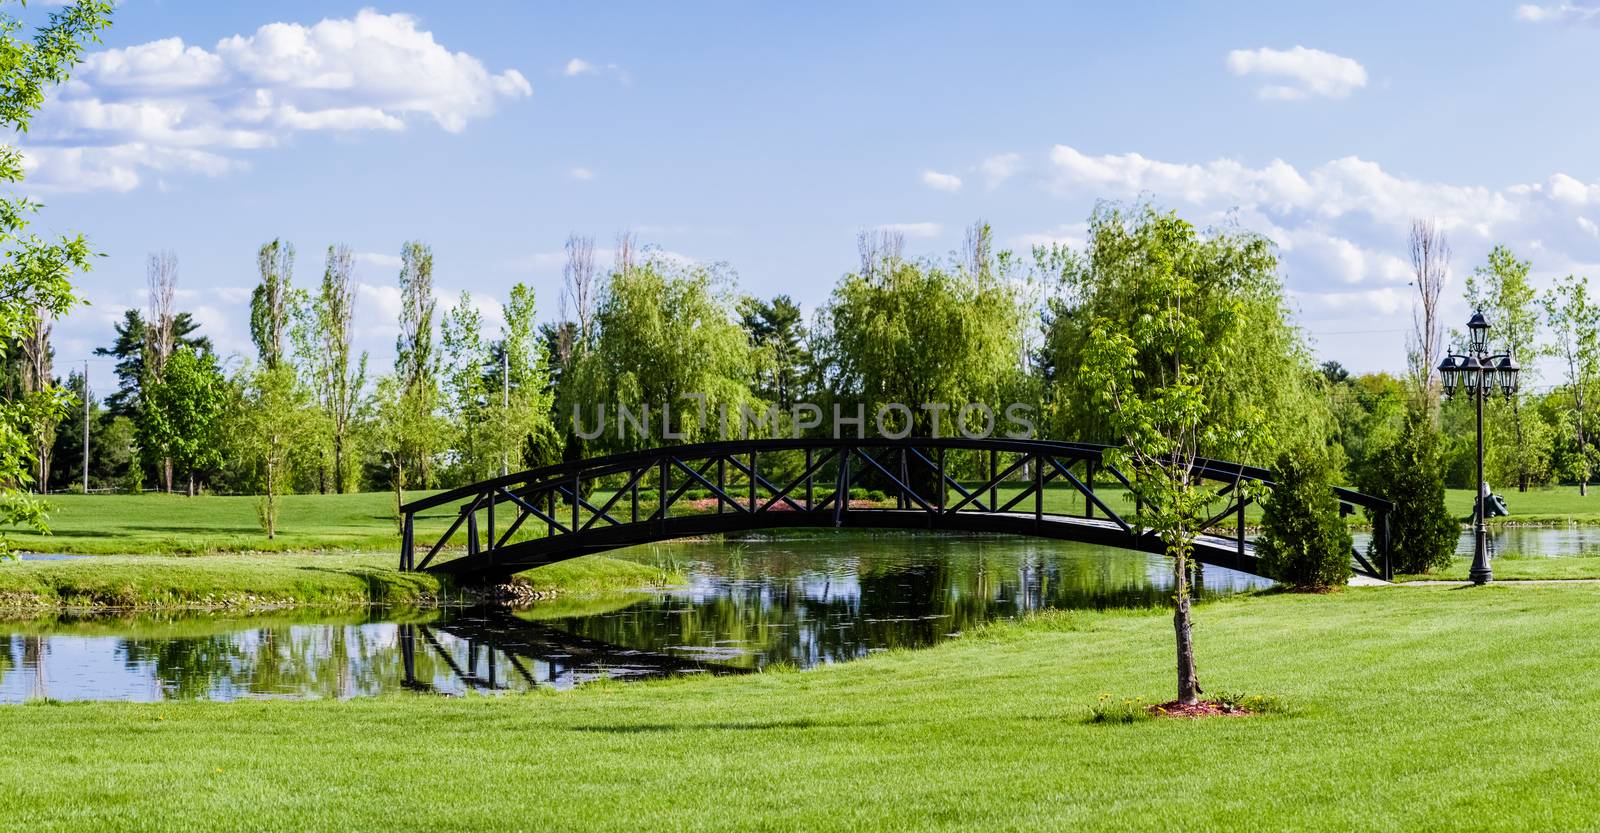 Little Bridge Over a Pond and landing on a Small Grass Island